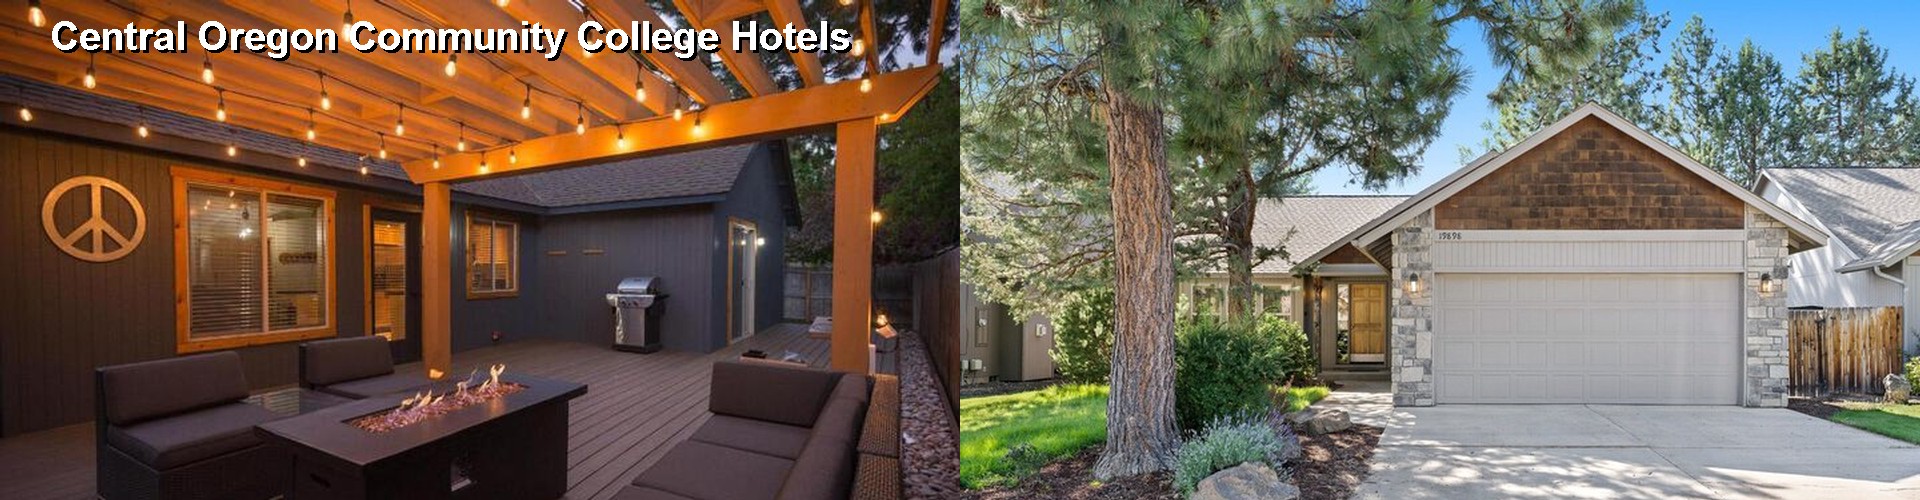 5 Best Hotels near Central Oregon Community College